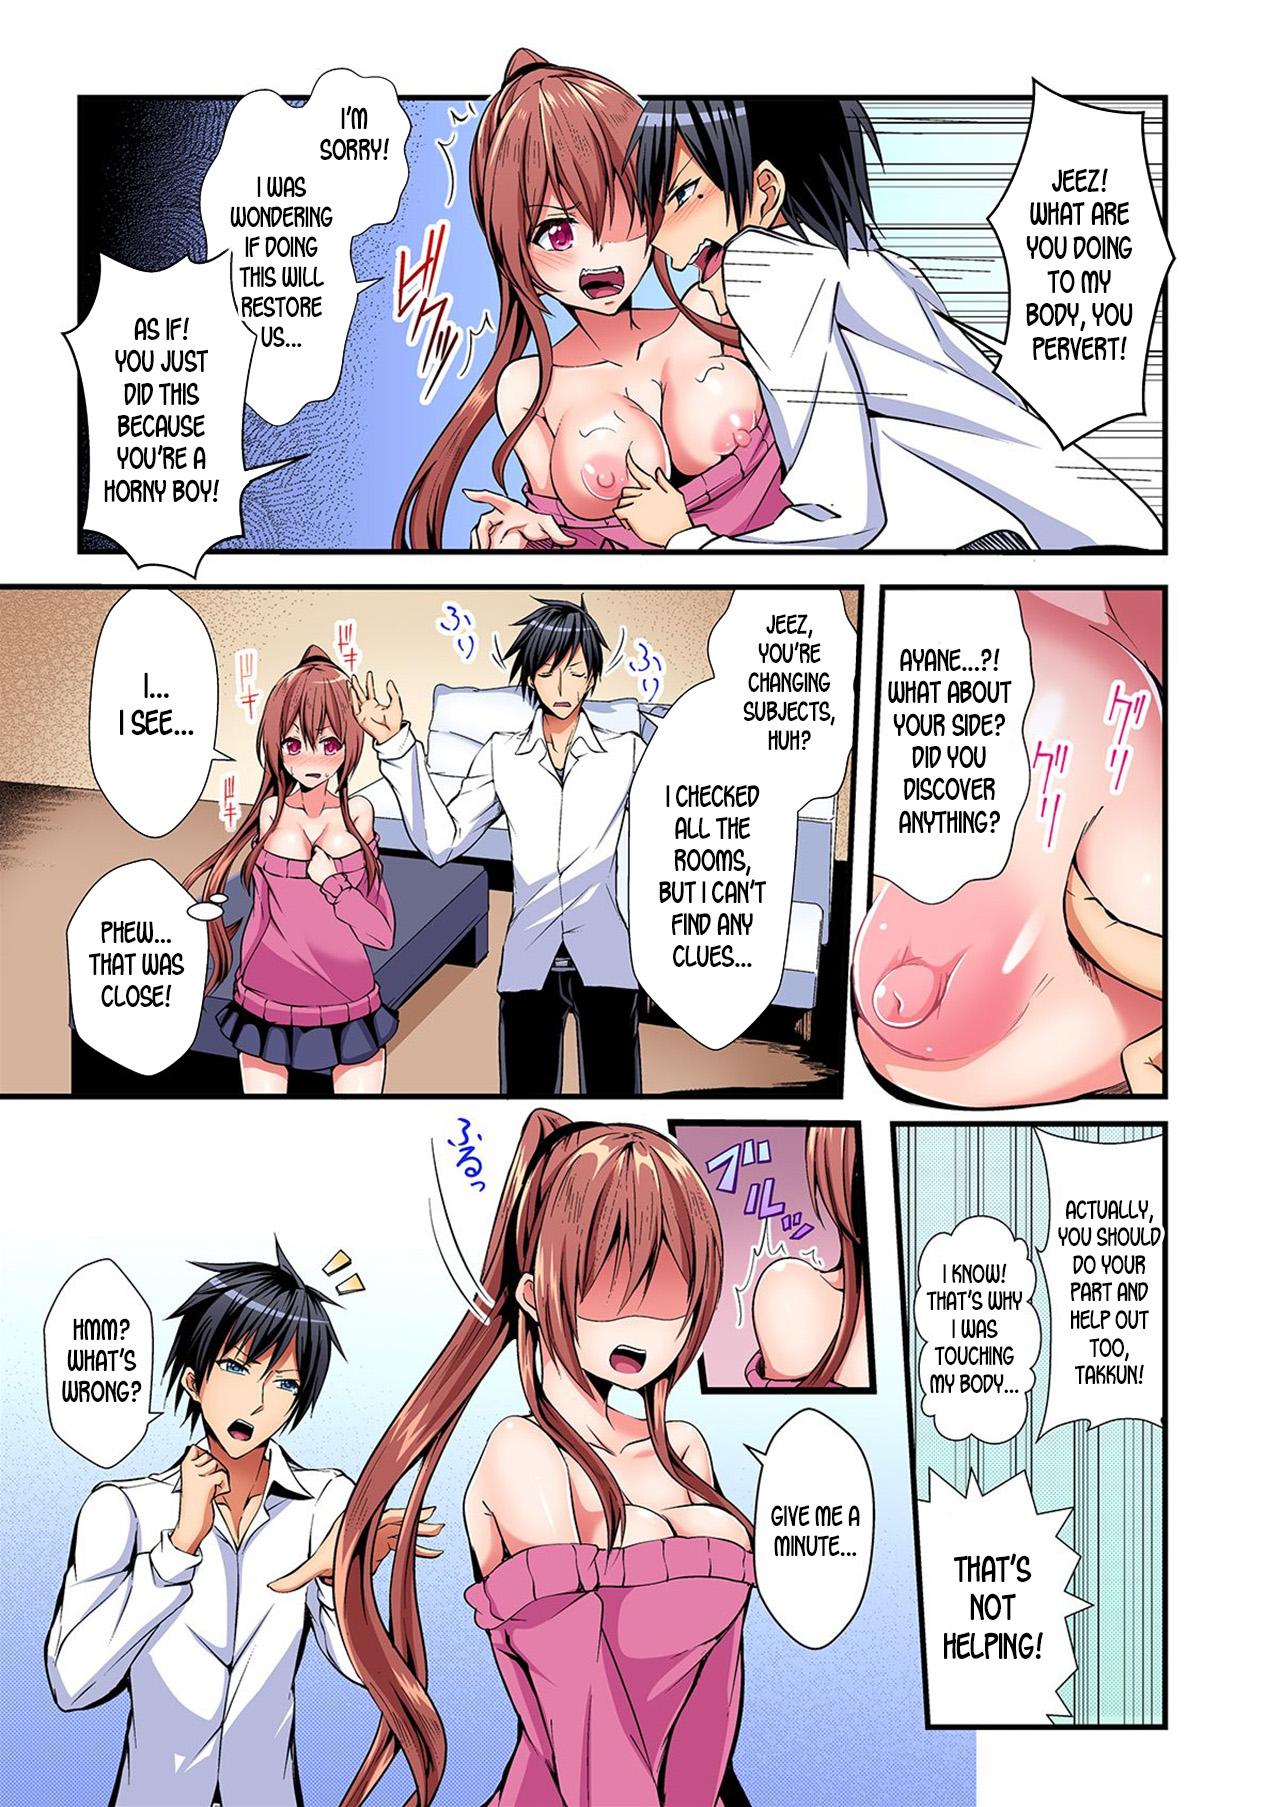 Best Blowjob Ever Switch bodies and have noisy sex! I can't stand Ayanee's sensitive body ch.1-5 Teenager - Page 12